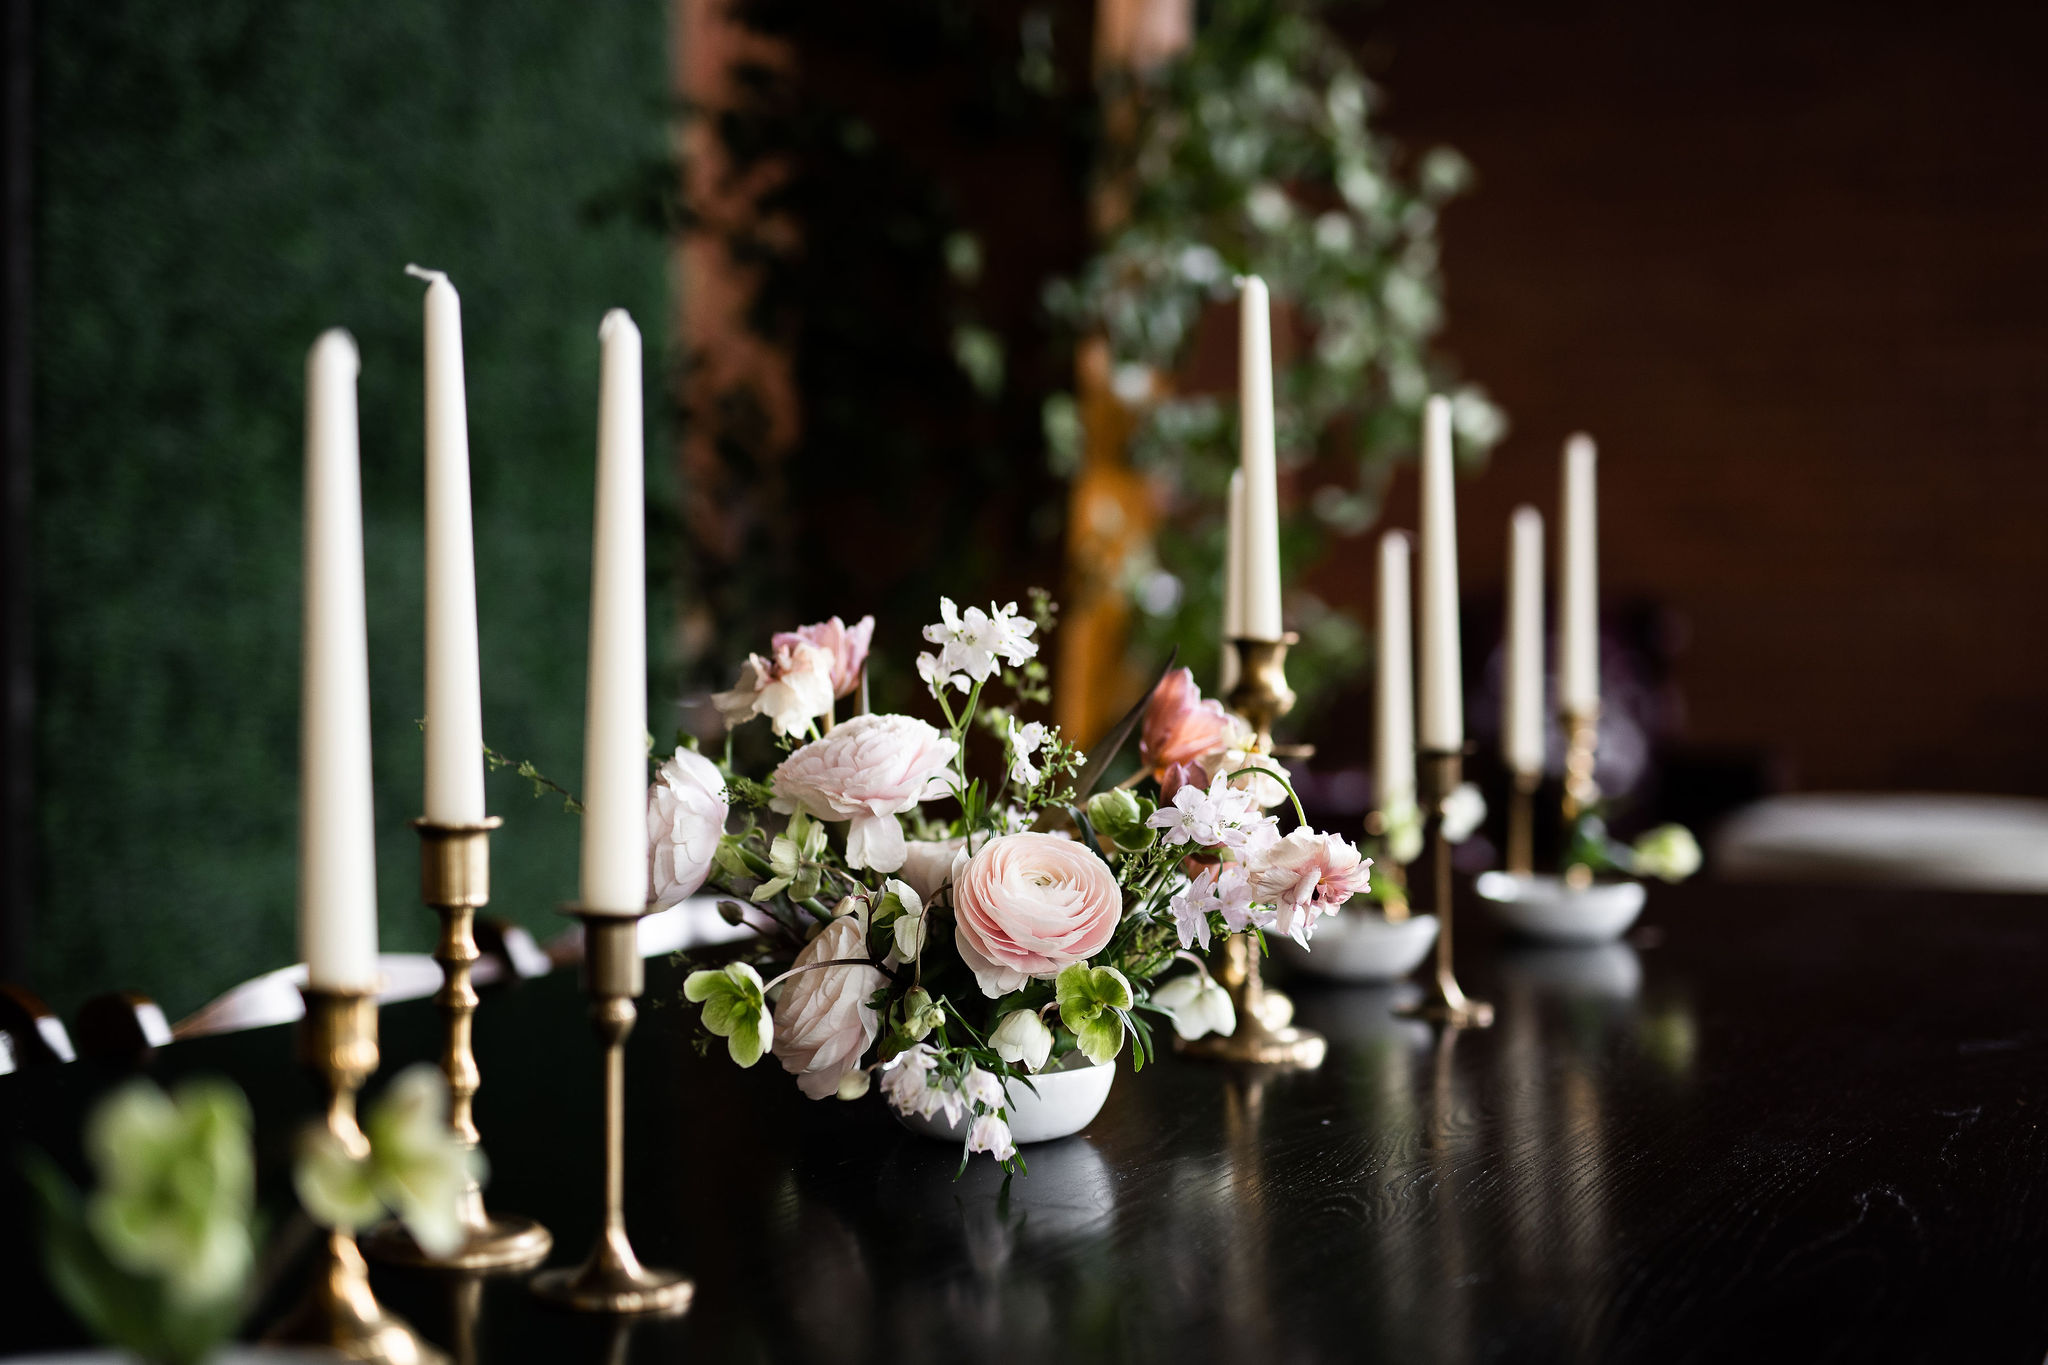 A beautiful flower arangment on a dark table surrounded by long candles.